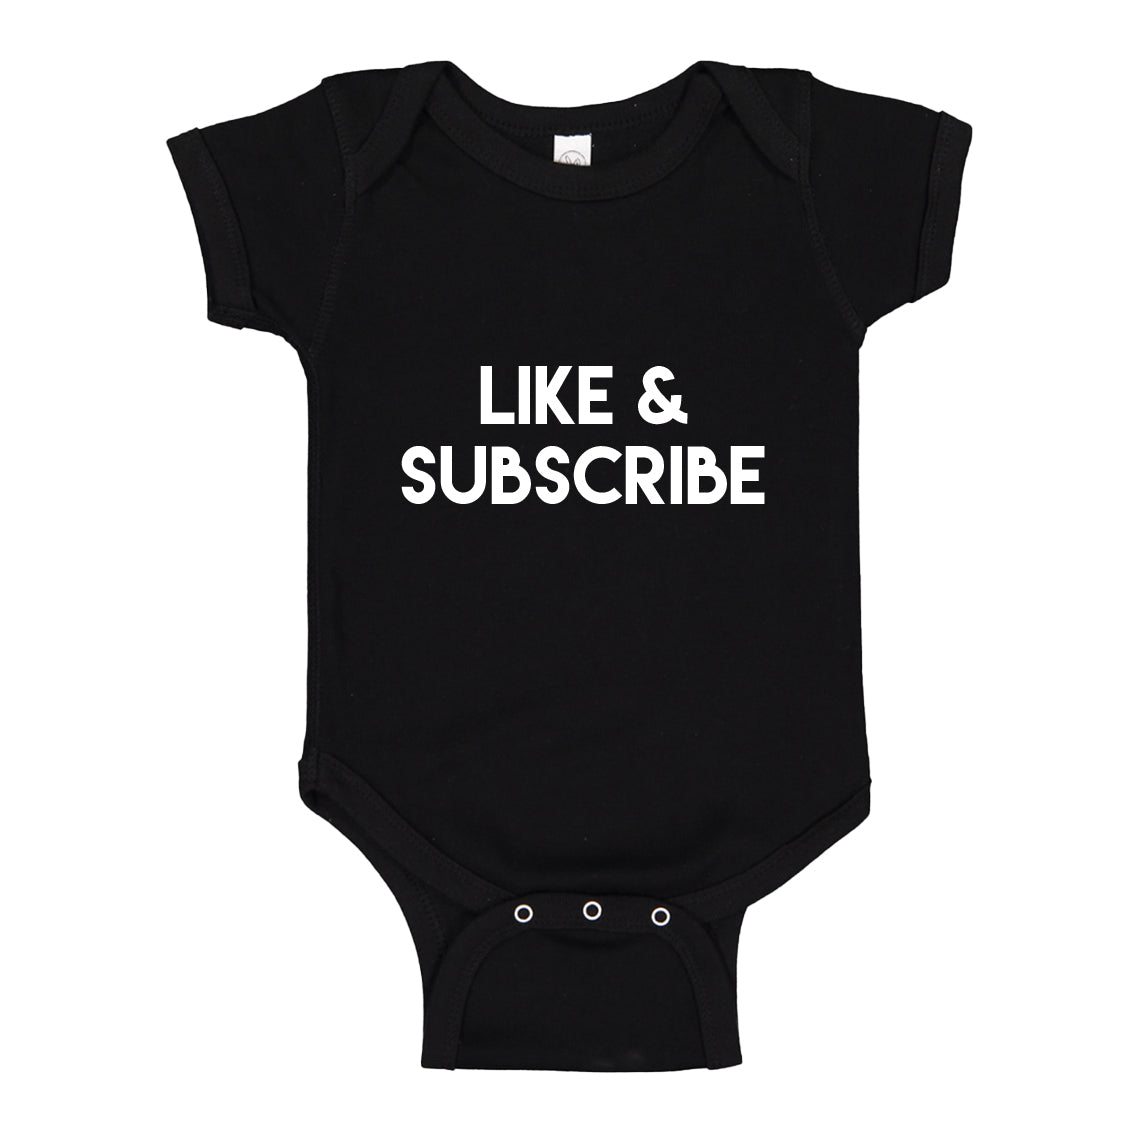 Baby Onesie Like and Subscribe 100% Cotton Infant Bodysuit